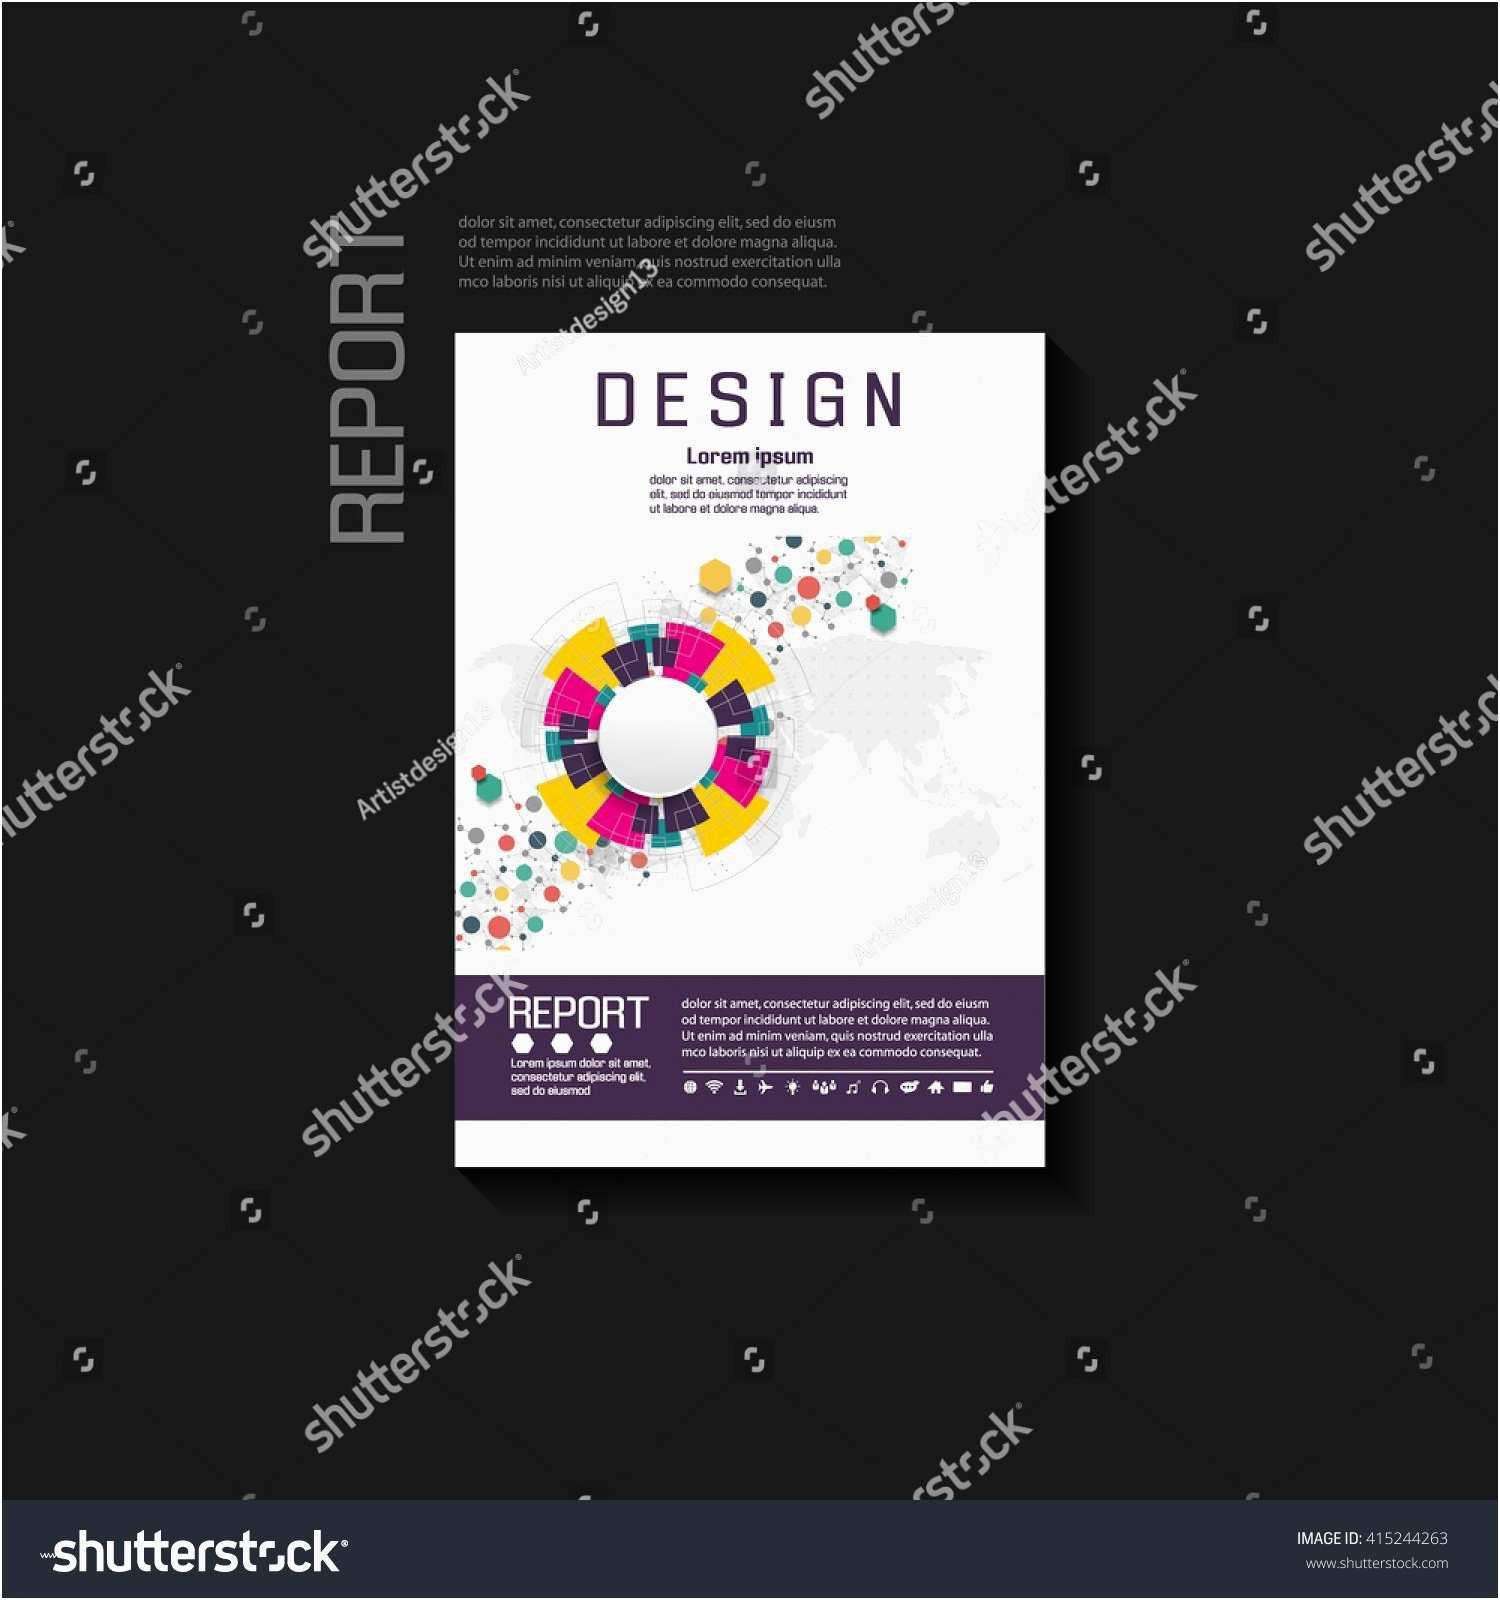 Personal Business Card Template Illustrator Free Word Of Business Card Size Template Illustrator